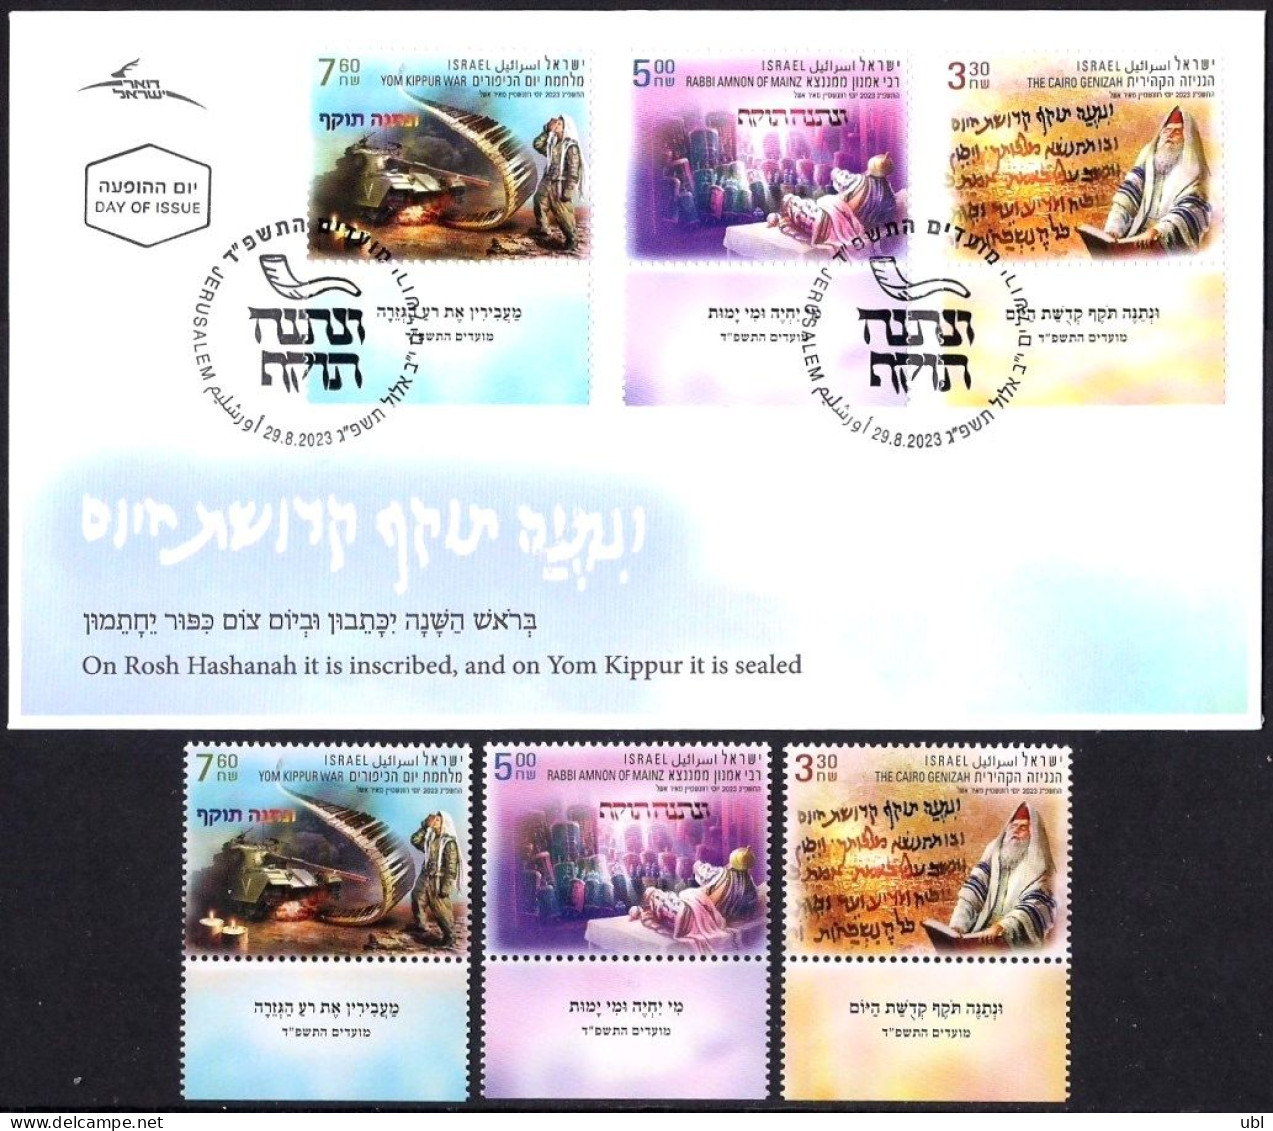 Israel 2023 - Jewish NEW YEAR Festivals - Unetaneh Tokef Holiday Prayer - A Set Of 3 Stamps With Tabs - MNH - Judaisme